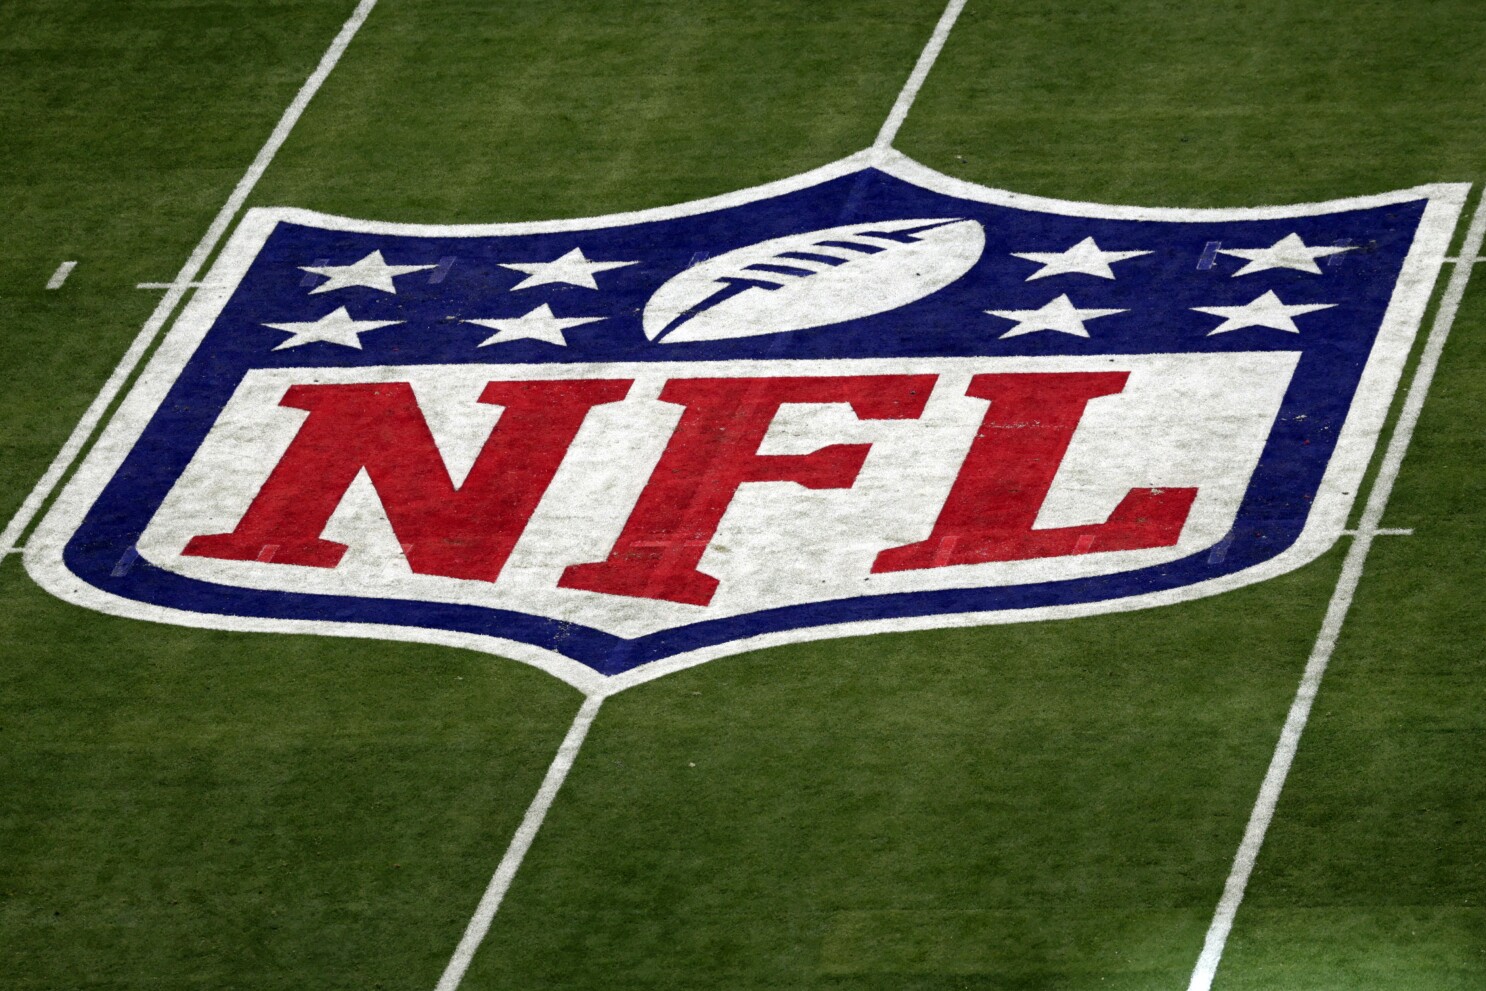 NFL crack down on players gambling shines focus on other leagues' rules